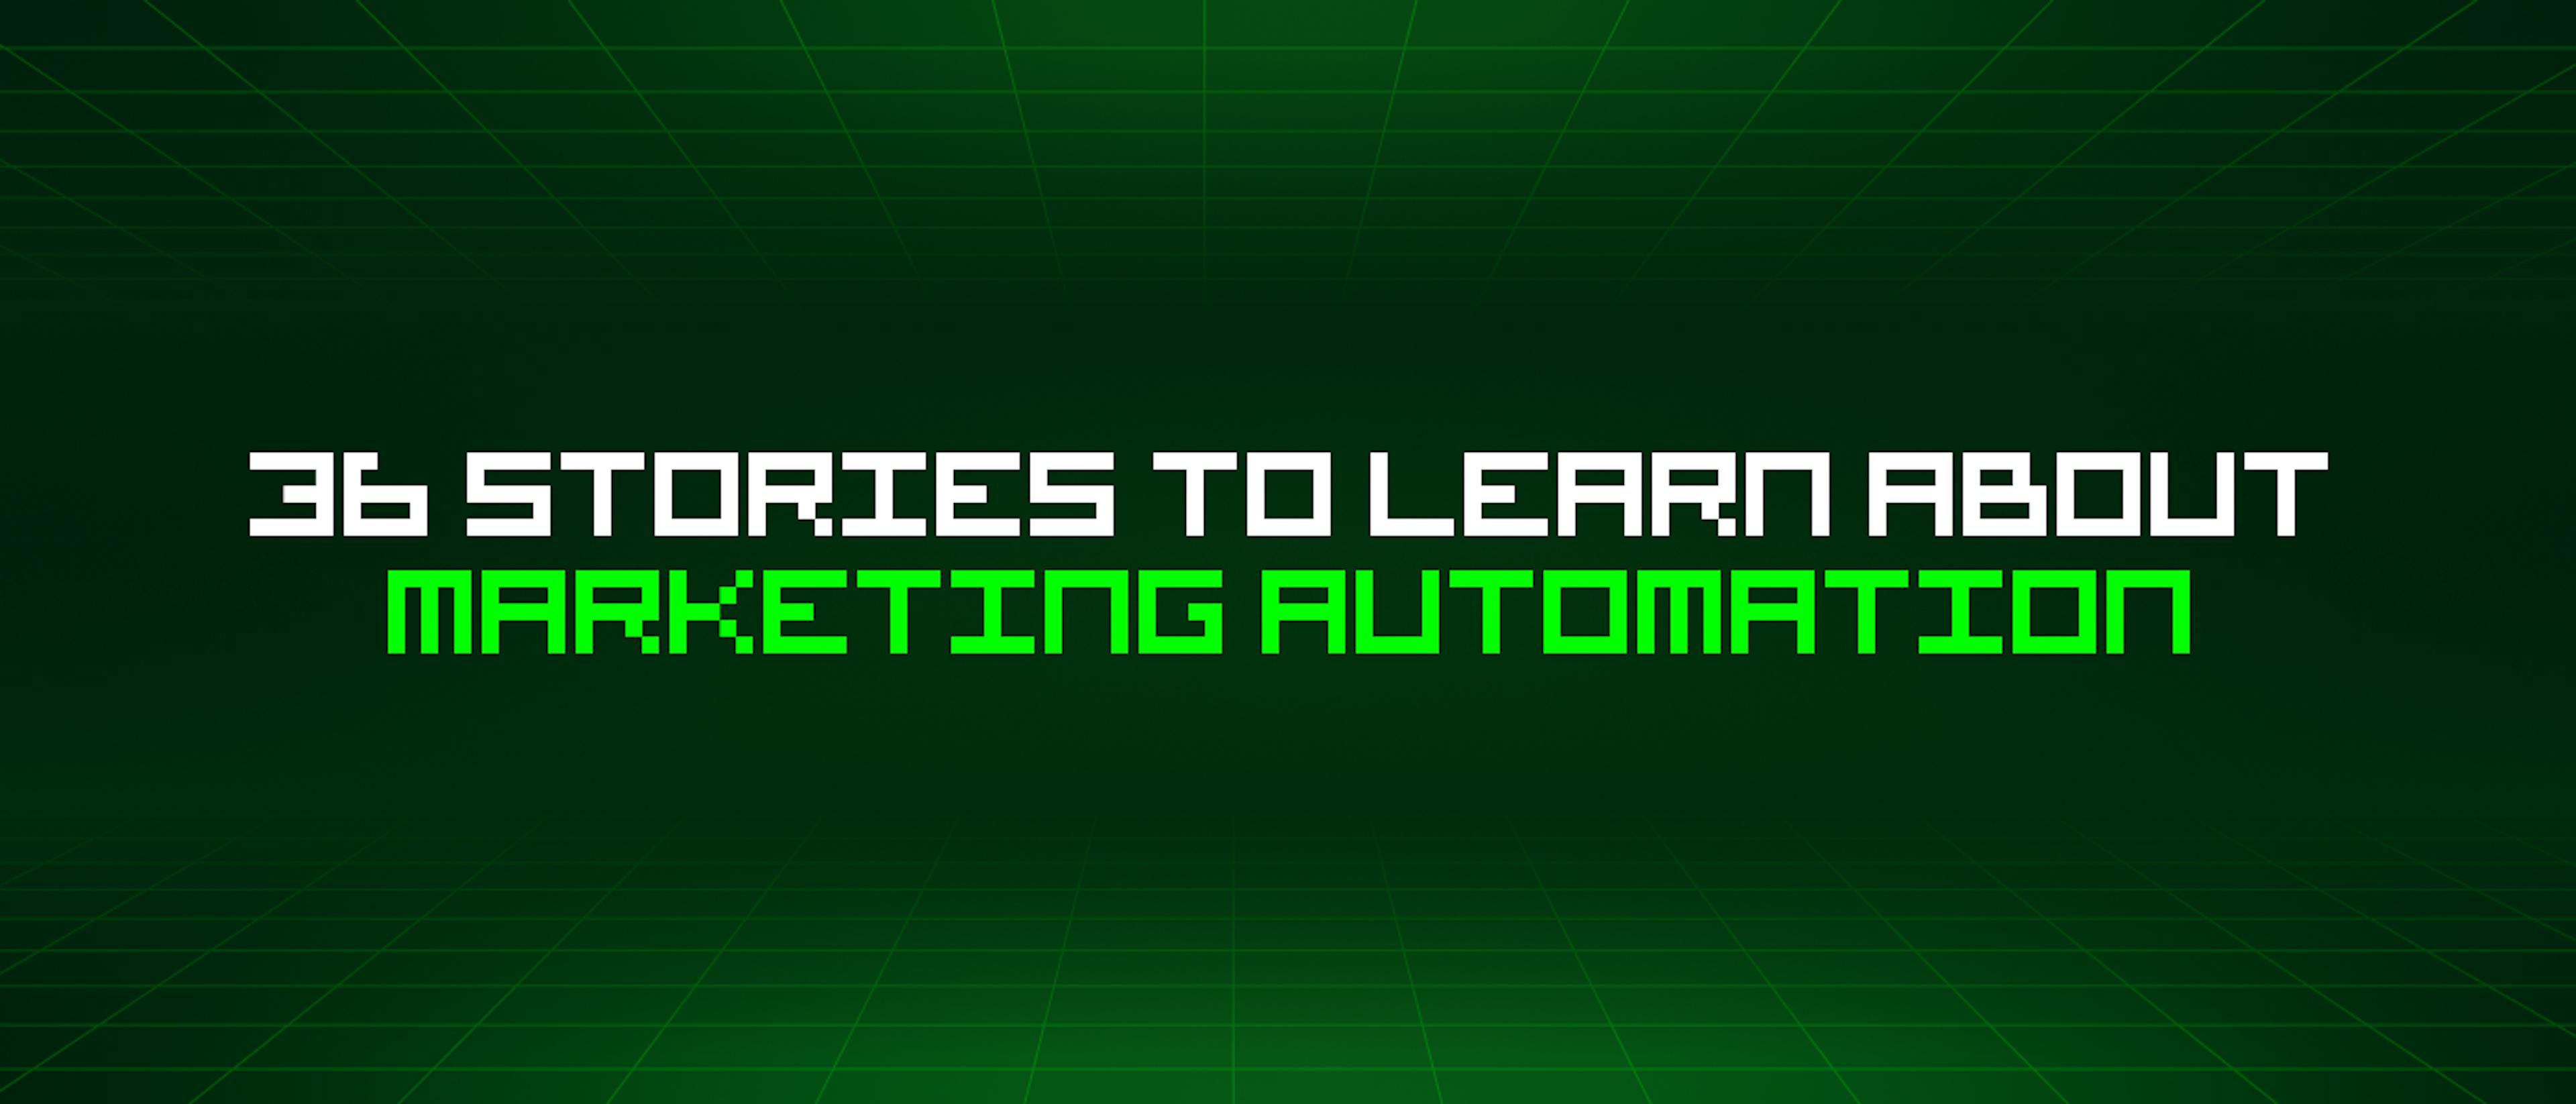 featured image - 36 Stories To Learn About Marketing Automation